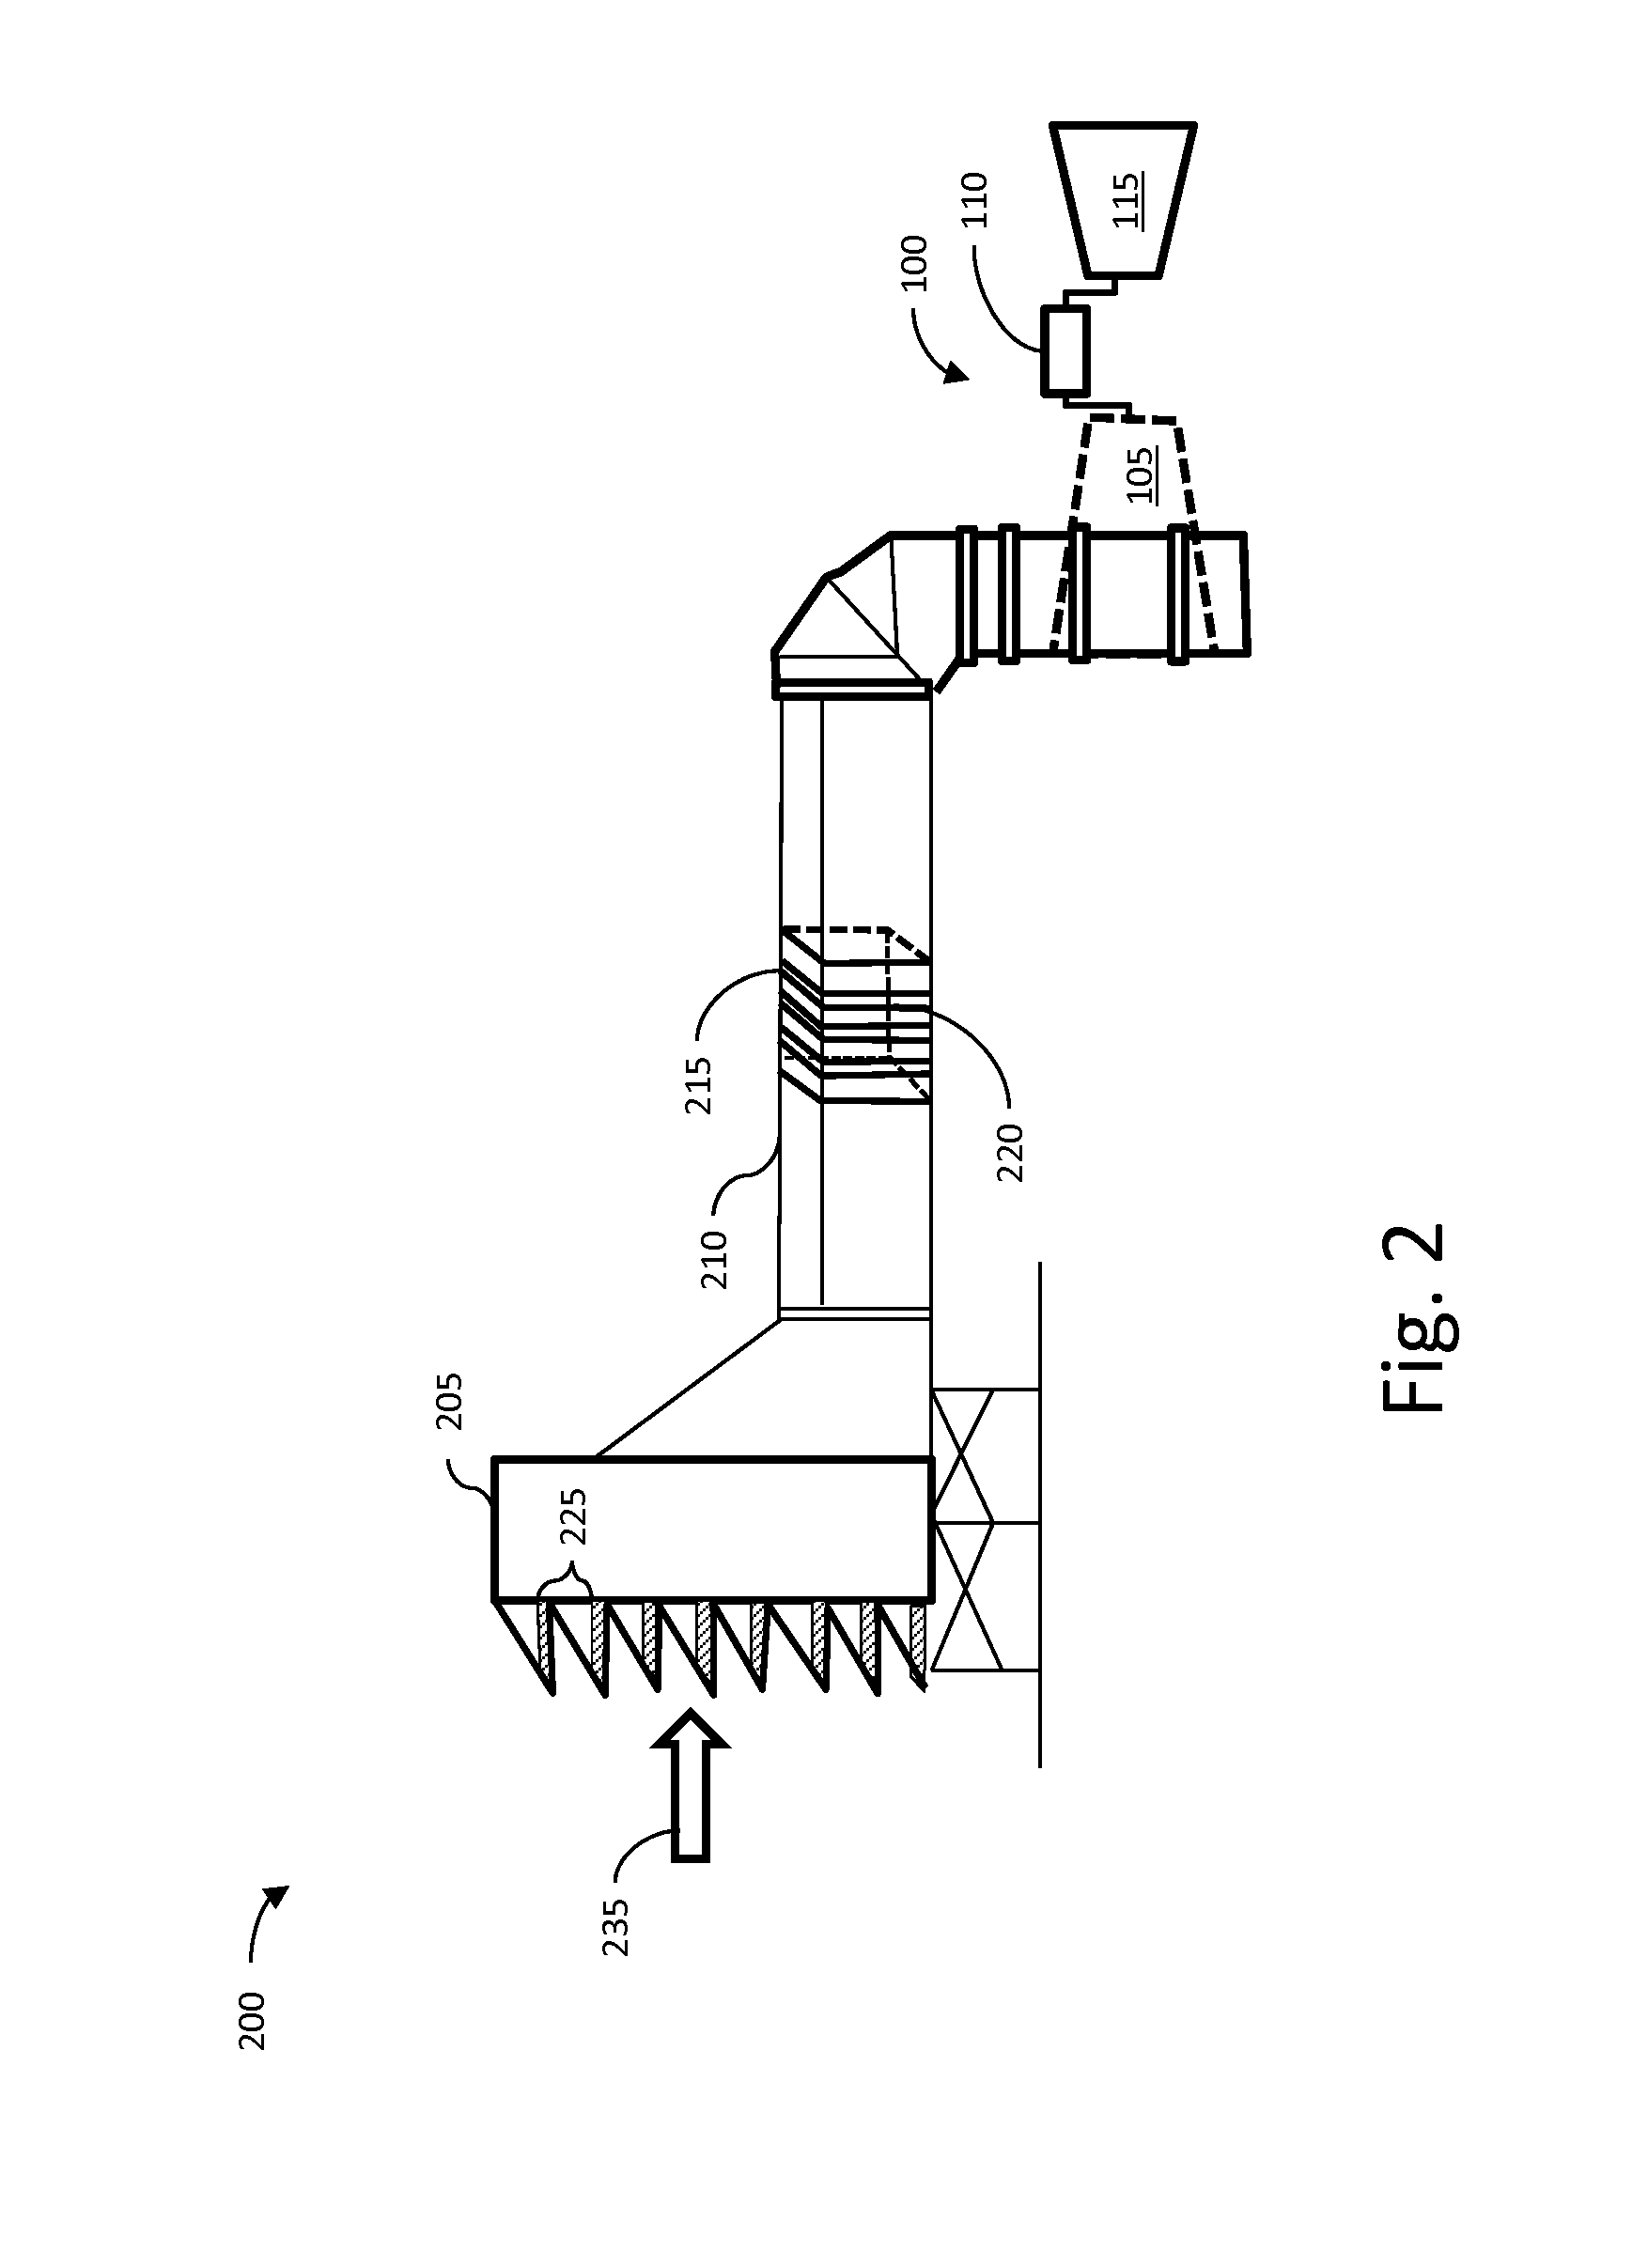 Systems and Methods for Bypassing a Coalescer in a Gas Turbine Inlet